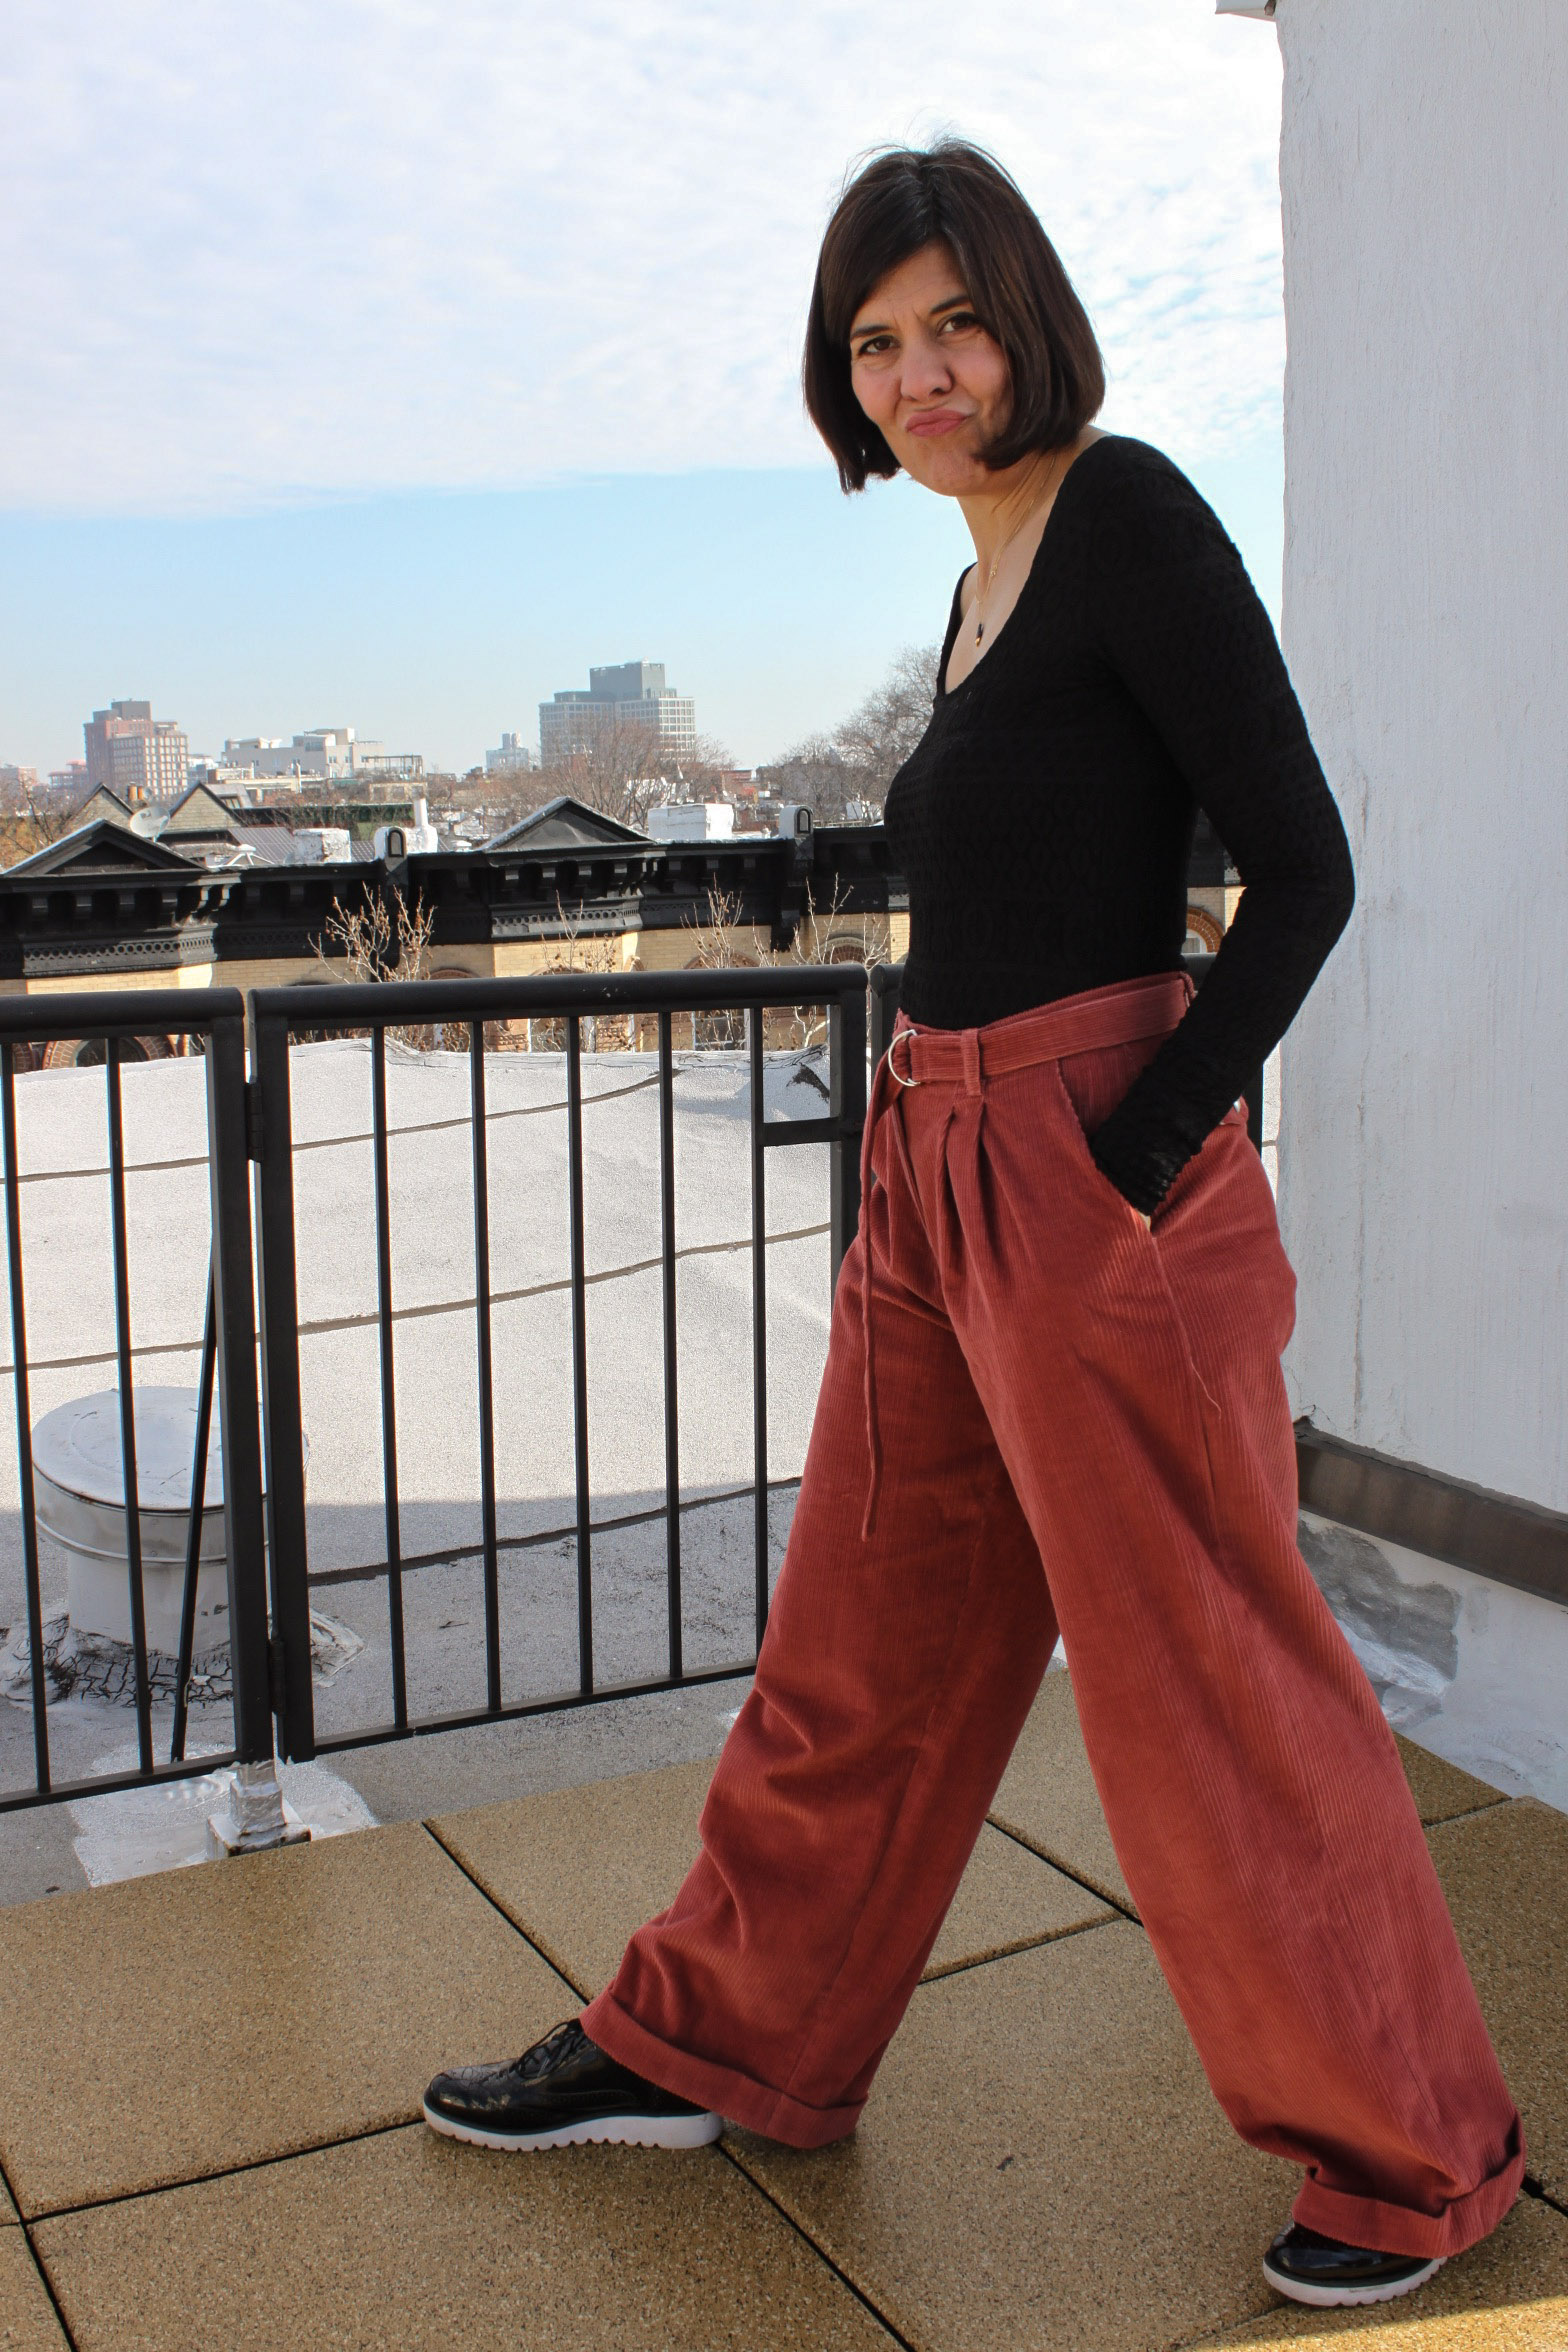 Salmon Pink Baggy Pants. On the Roof! — Noble & Daughter